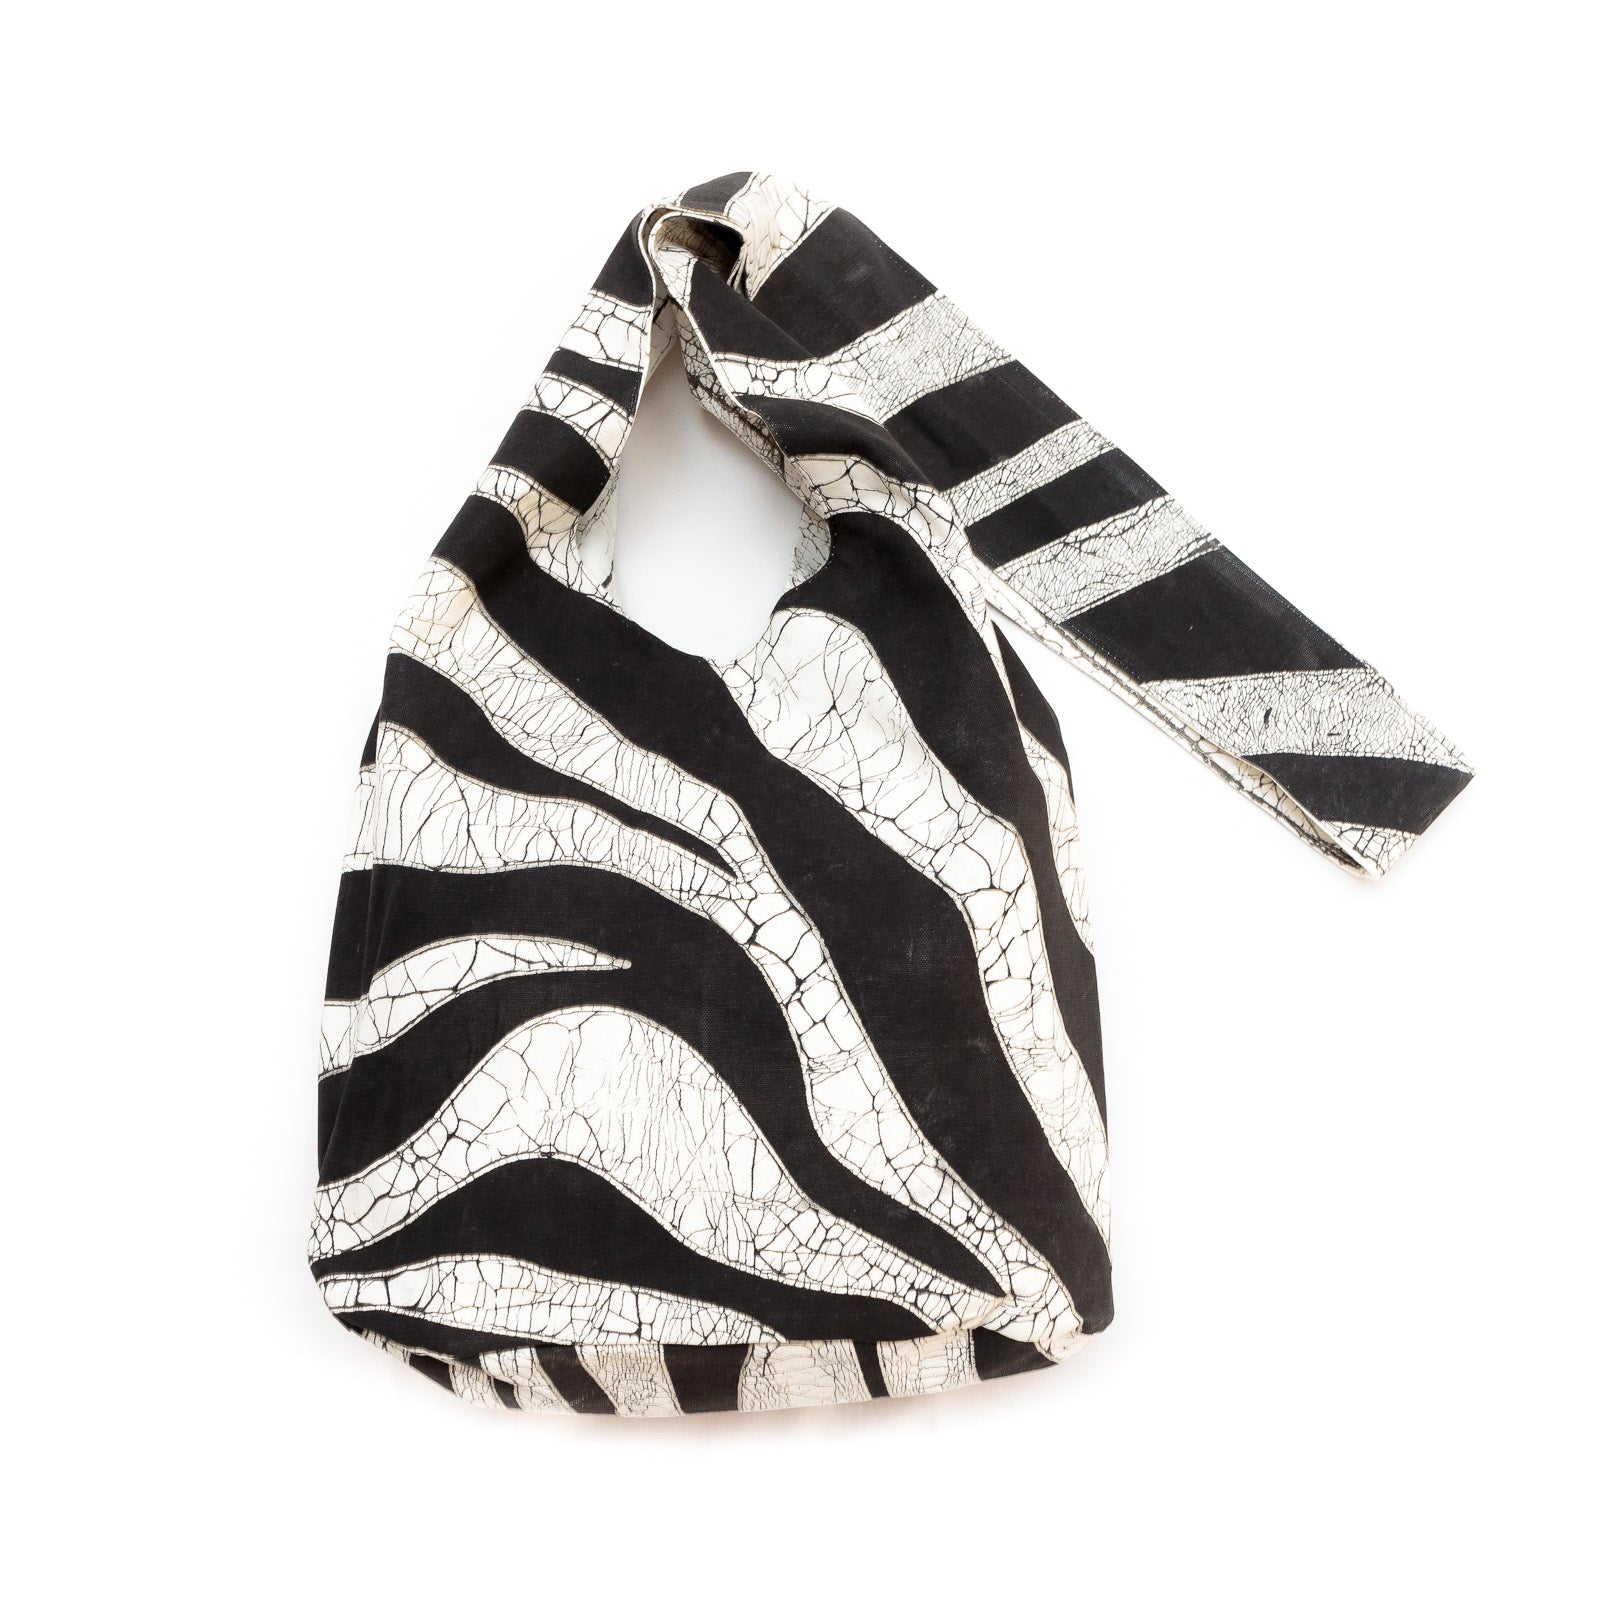 Sling Bags - Rawhide Zebra - Hand Painted by TRIBAL TEXTILES - Handcrafted Home Decor Interiors - African Made